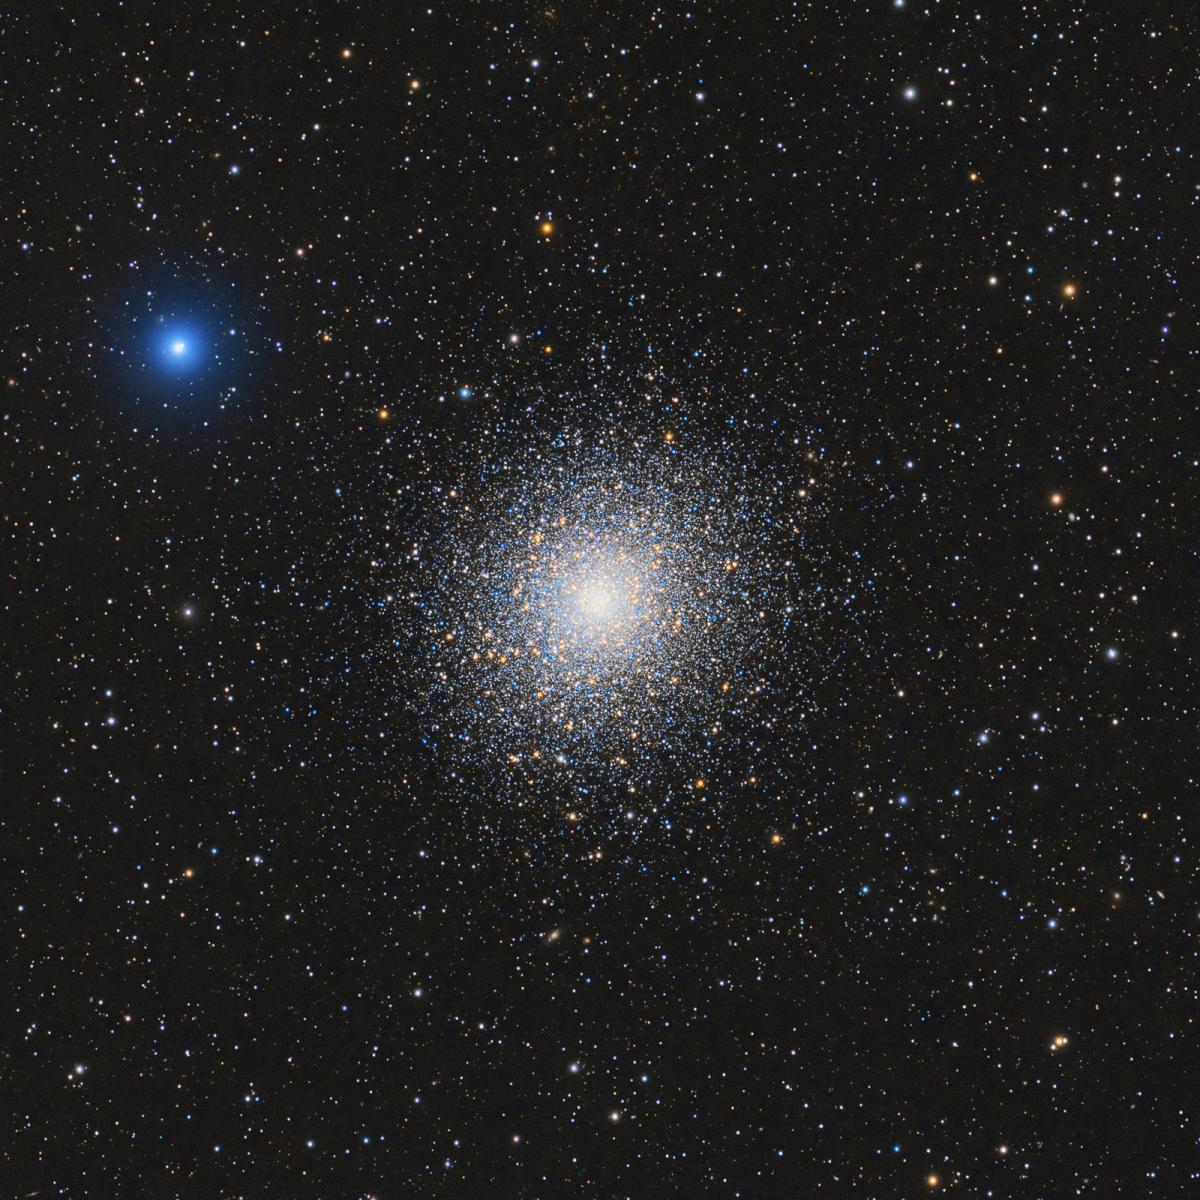 Against a black starry night sky filled with stars in blues, oranges and whites is a massive star cluster with thousands of stars all clumped together into a bright white centre